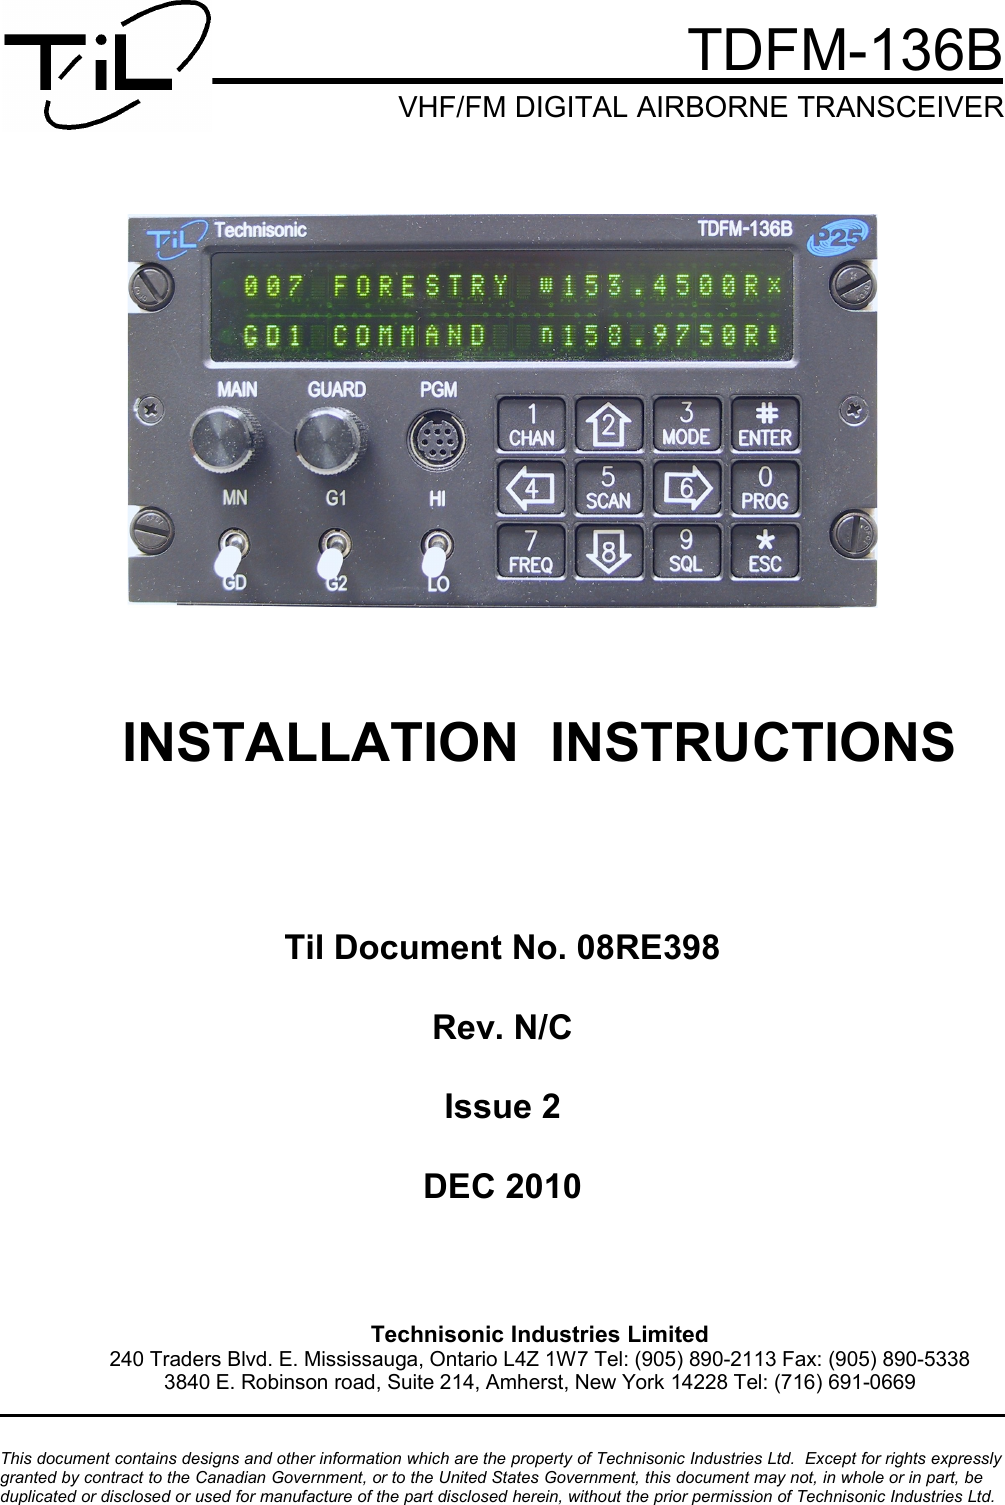                                                                                             TDFM-136B          VHF/FM DIGITAL AIRBORNE TRANSCEIVERINSTALLATION  INSTRUCTIONSTil Document No. 08RE398Rev. N/CIssue 2DEC 2010Technisonic Industries Limited240 Traders Blvd. E. Mississauga, Ontario L4Z 1W7 Tel: (905) 890-2113 Fax: (905) 890-53383840 E. Robinson road, Suite 214, Amherst, New York 14228 Tel: (716) 691-0669This document contains designs and other information which are the property of Technisonic Industries Ltd.  Except for rights expressly  granted by contract to the Canadian Government, or to the United States Government, this document may not, in whole or in part, be  duplicated or disclosed or used for manufacture of the part disclosed herein, without the prior permission of Technisonic Industries Ltd.